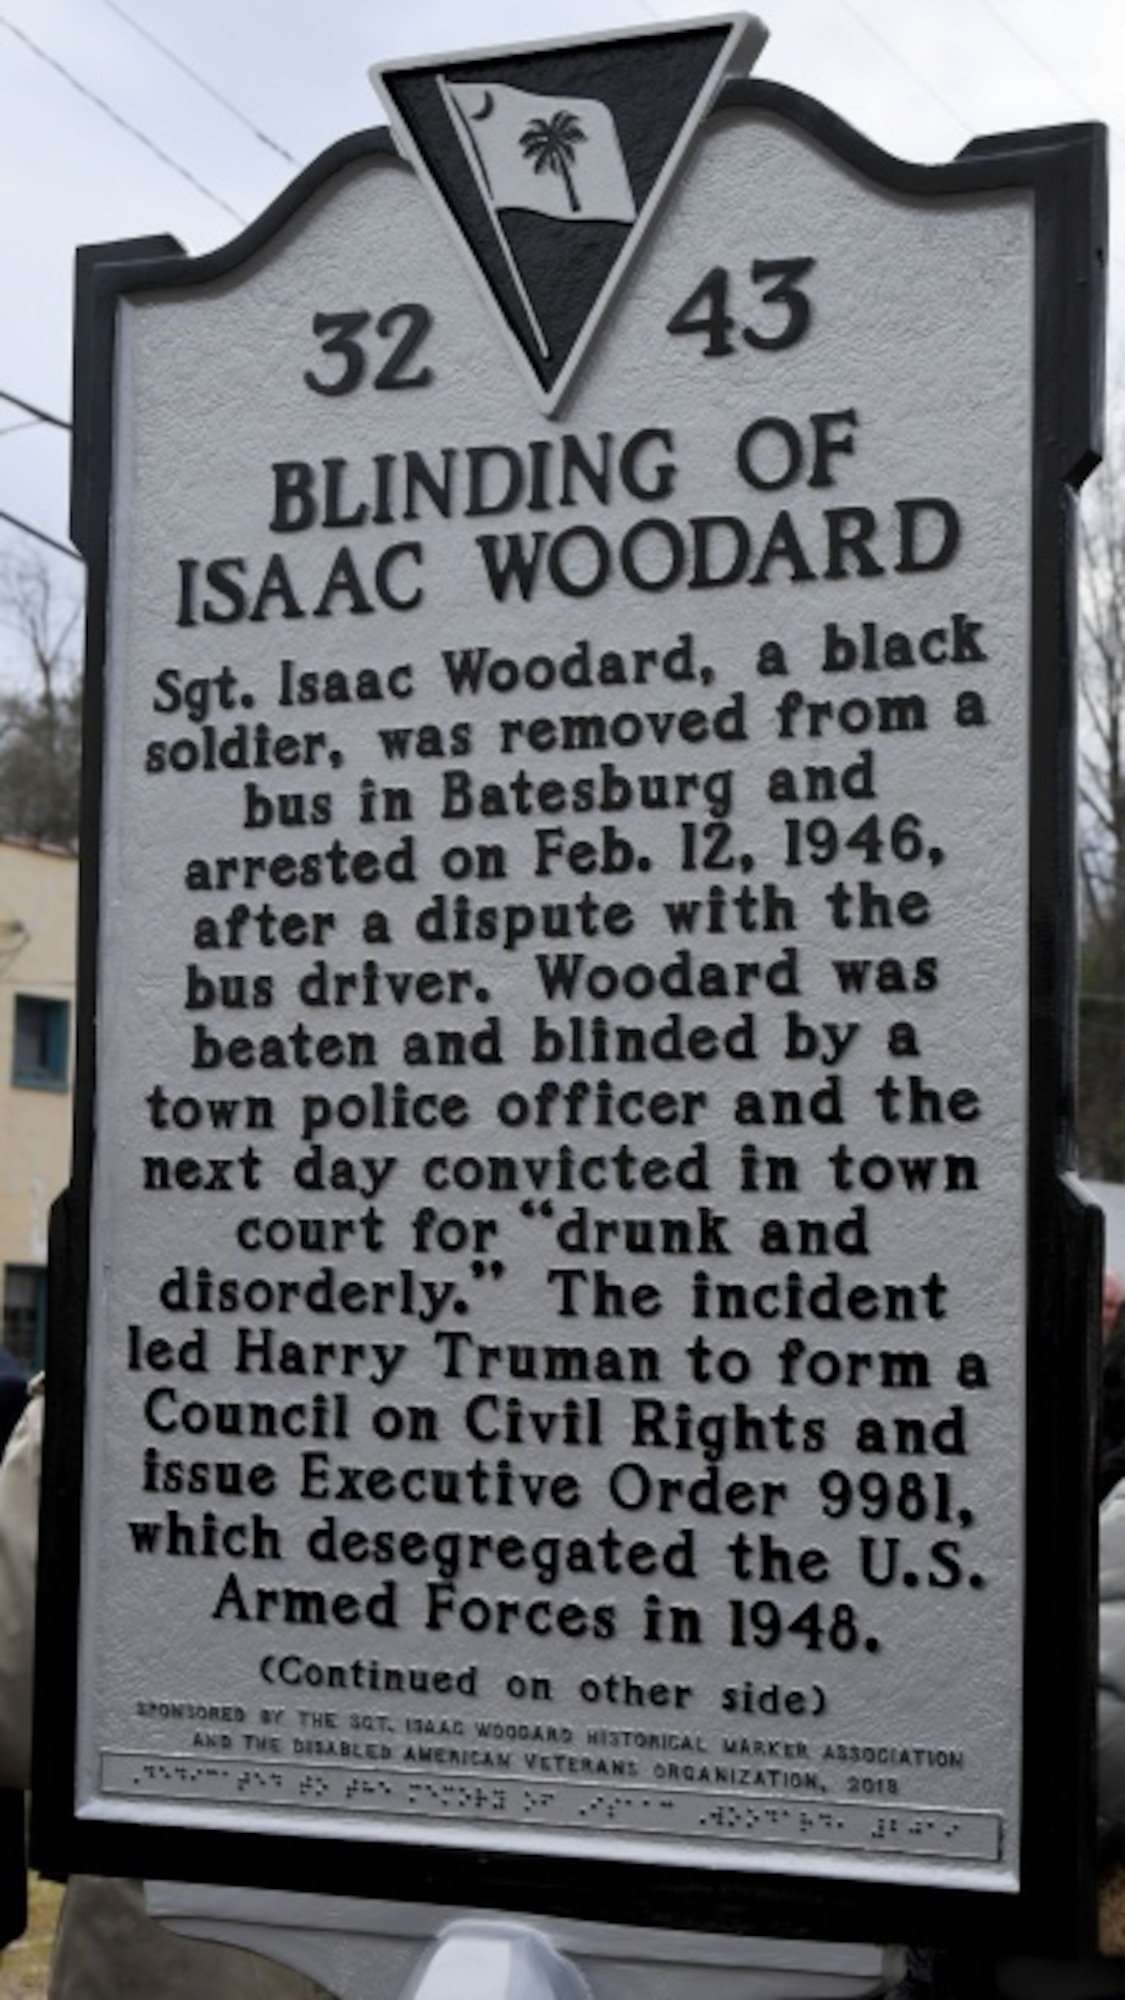 A memorial plaque erected in 2019 in Batesburg-Leesville, South Carolina, memorializes the attack on Woodard. (Photo by U.S. Army)